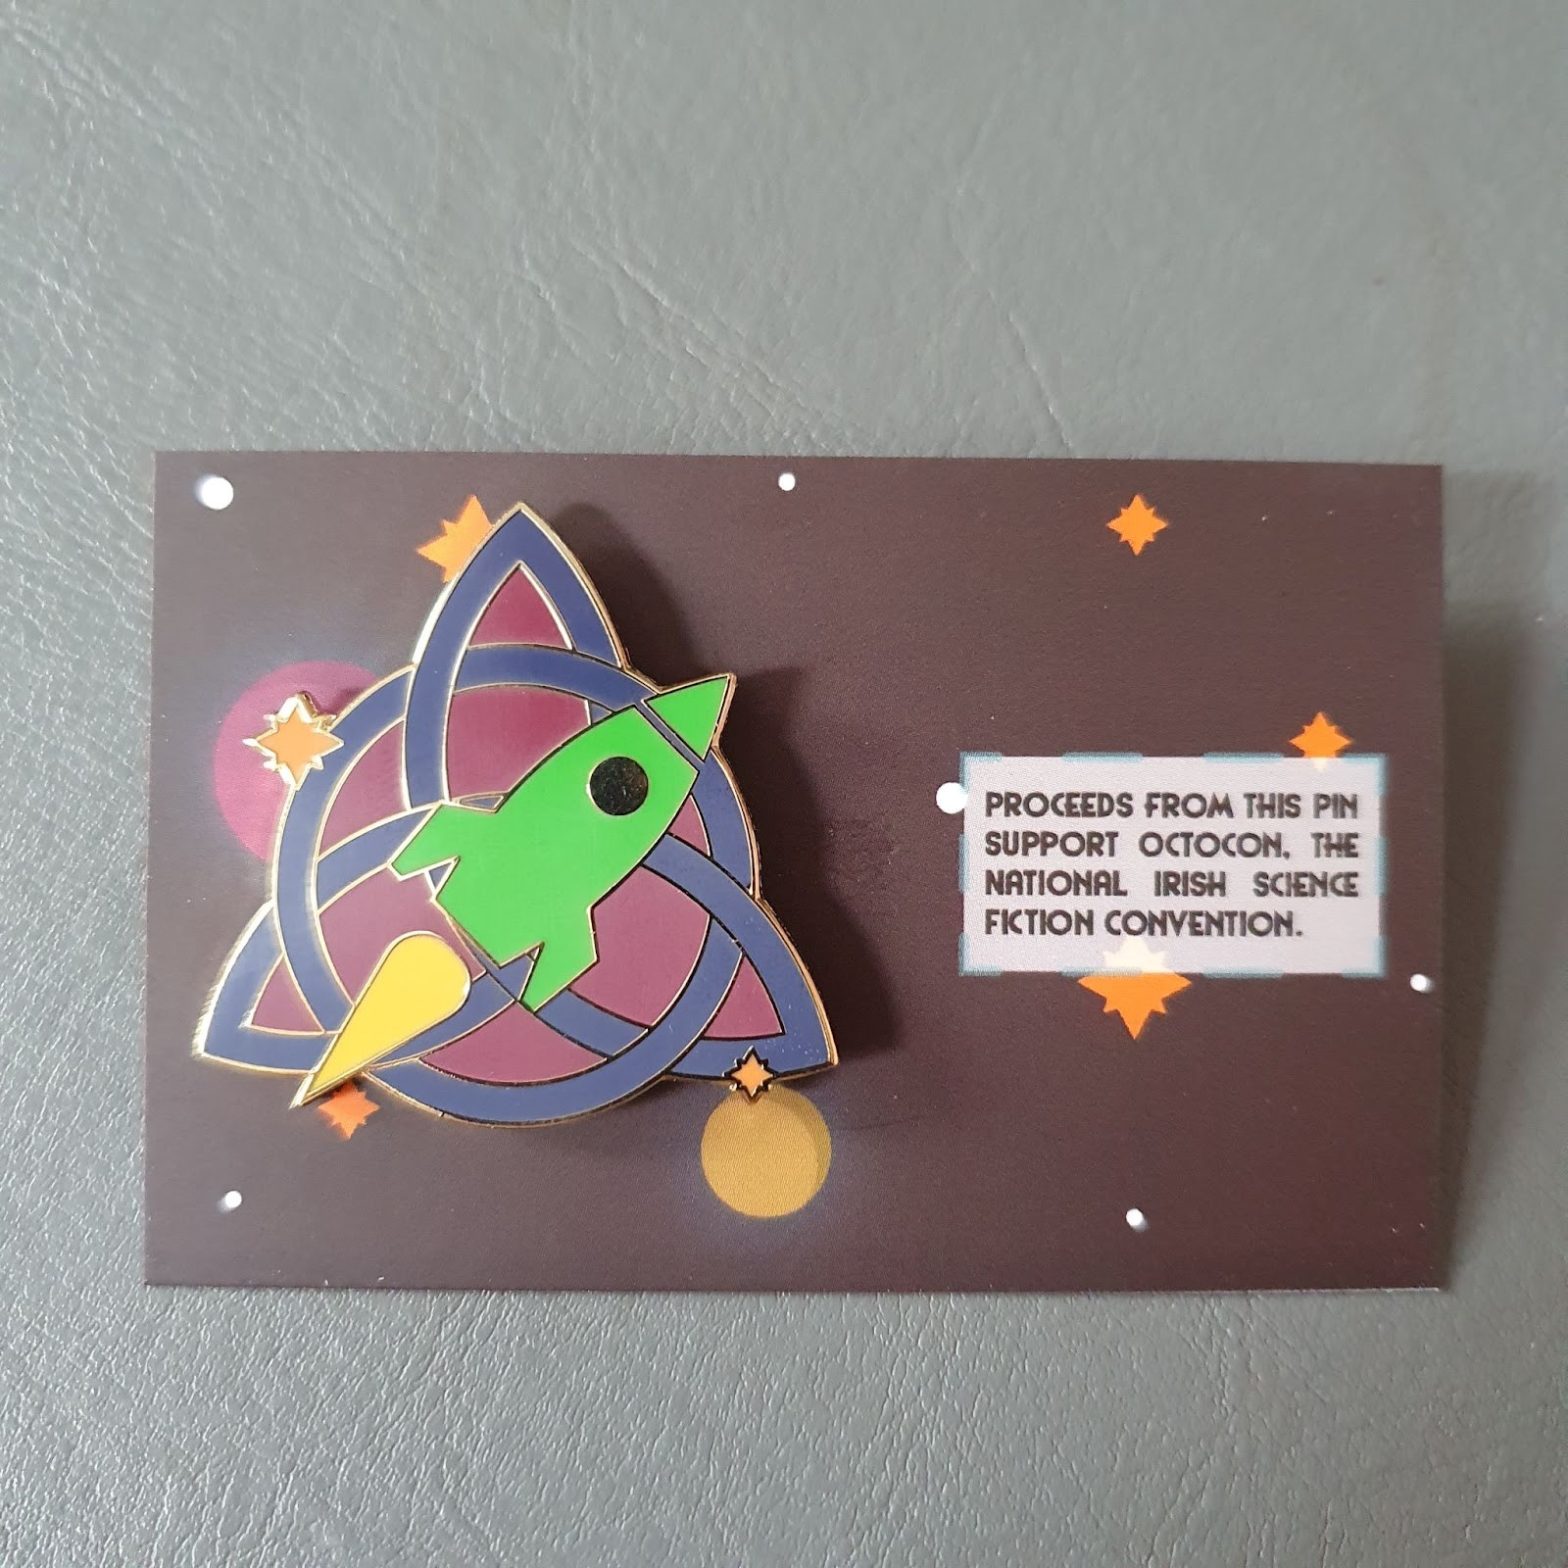 Proceeds from this pin support Octocon, the national Irish Science Fiction Convention